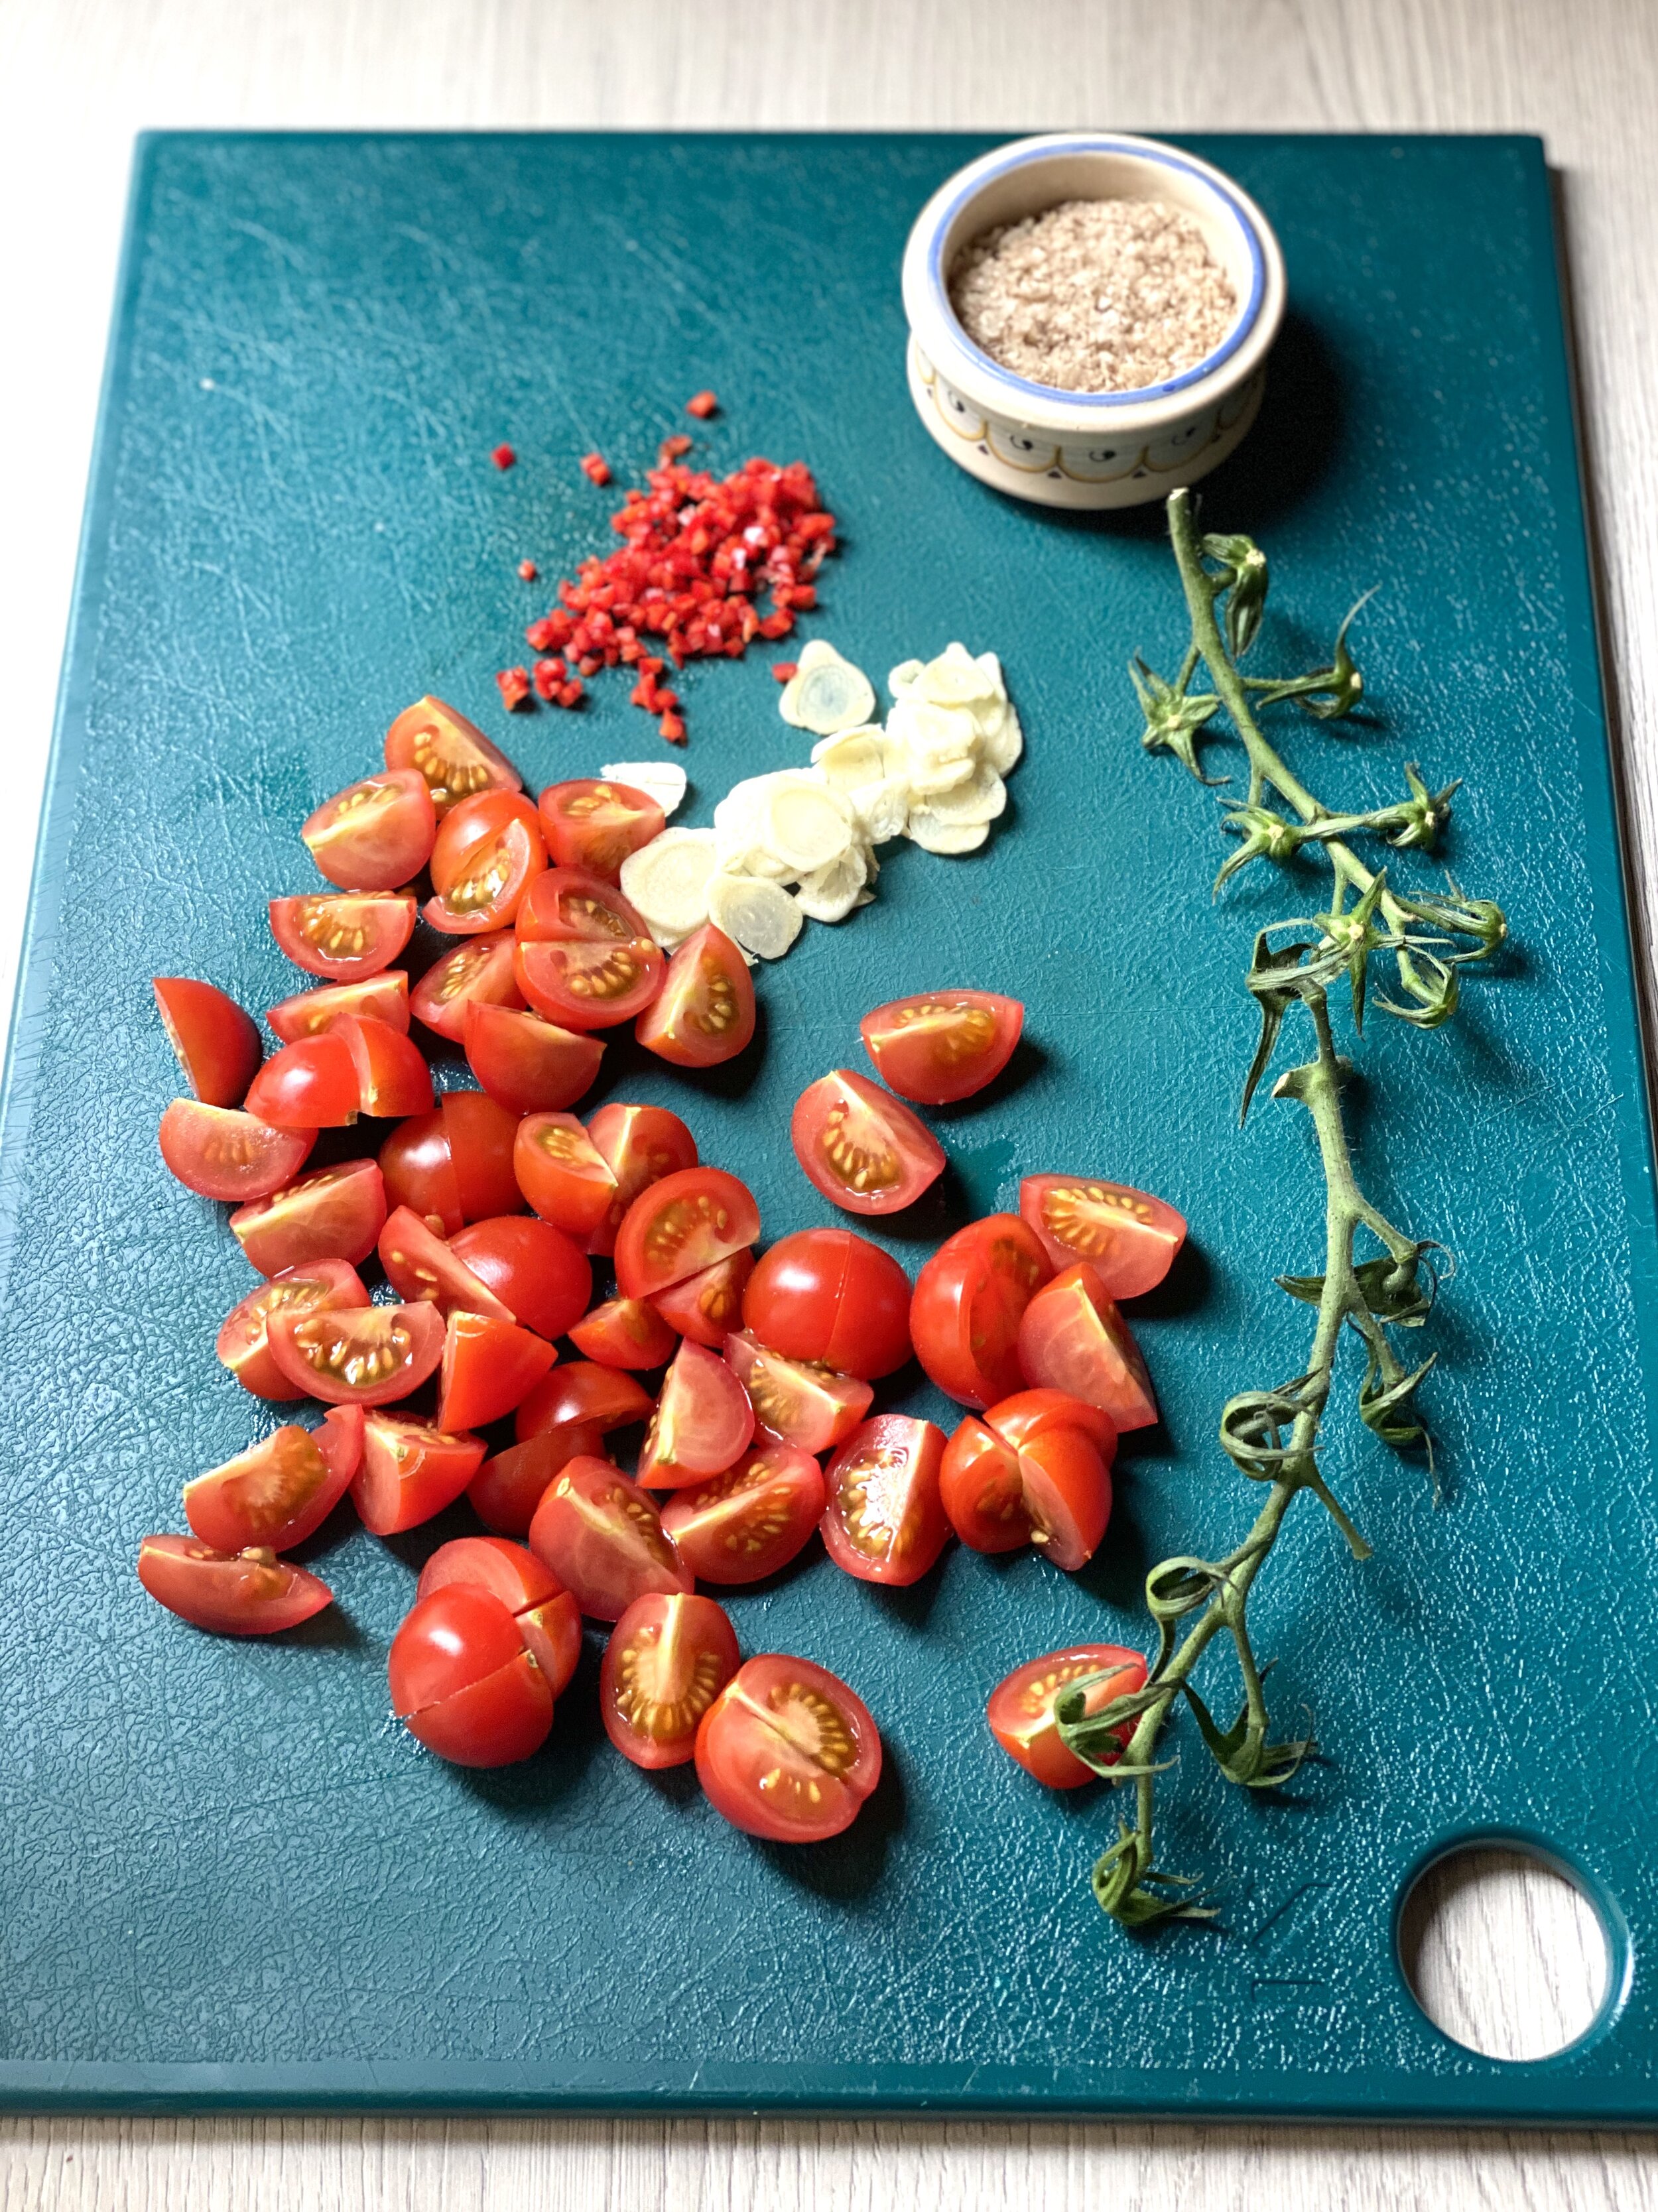 Ingredients for sweet cherry tomato sauce